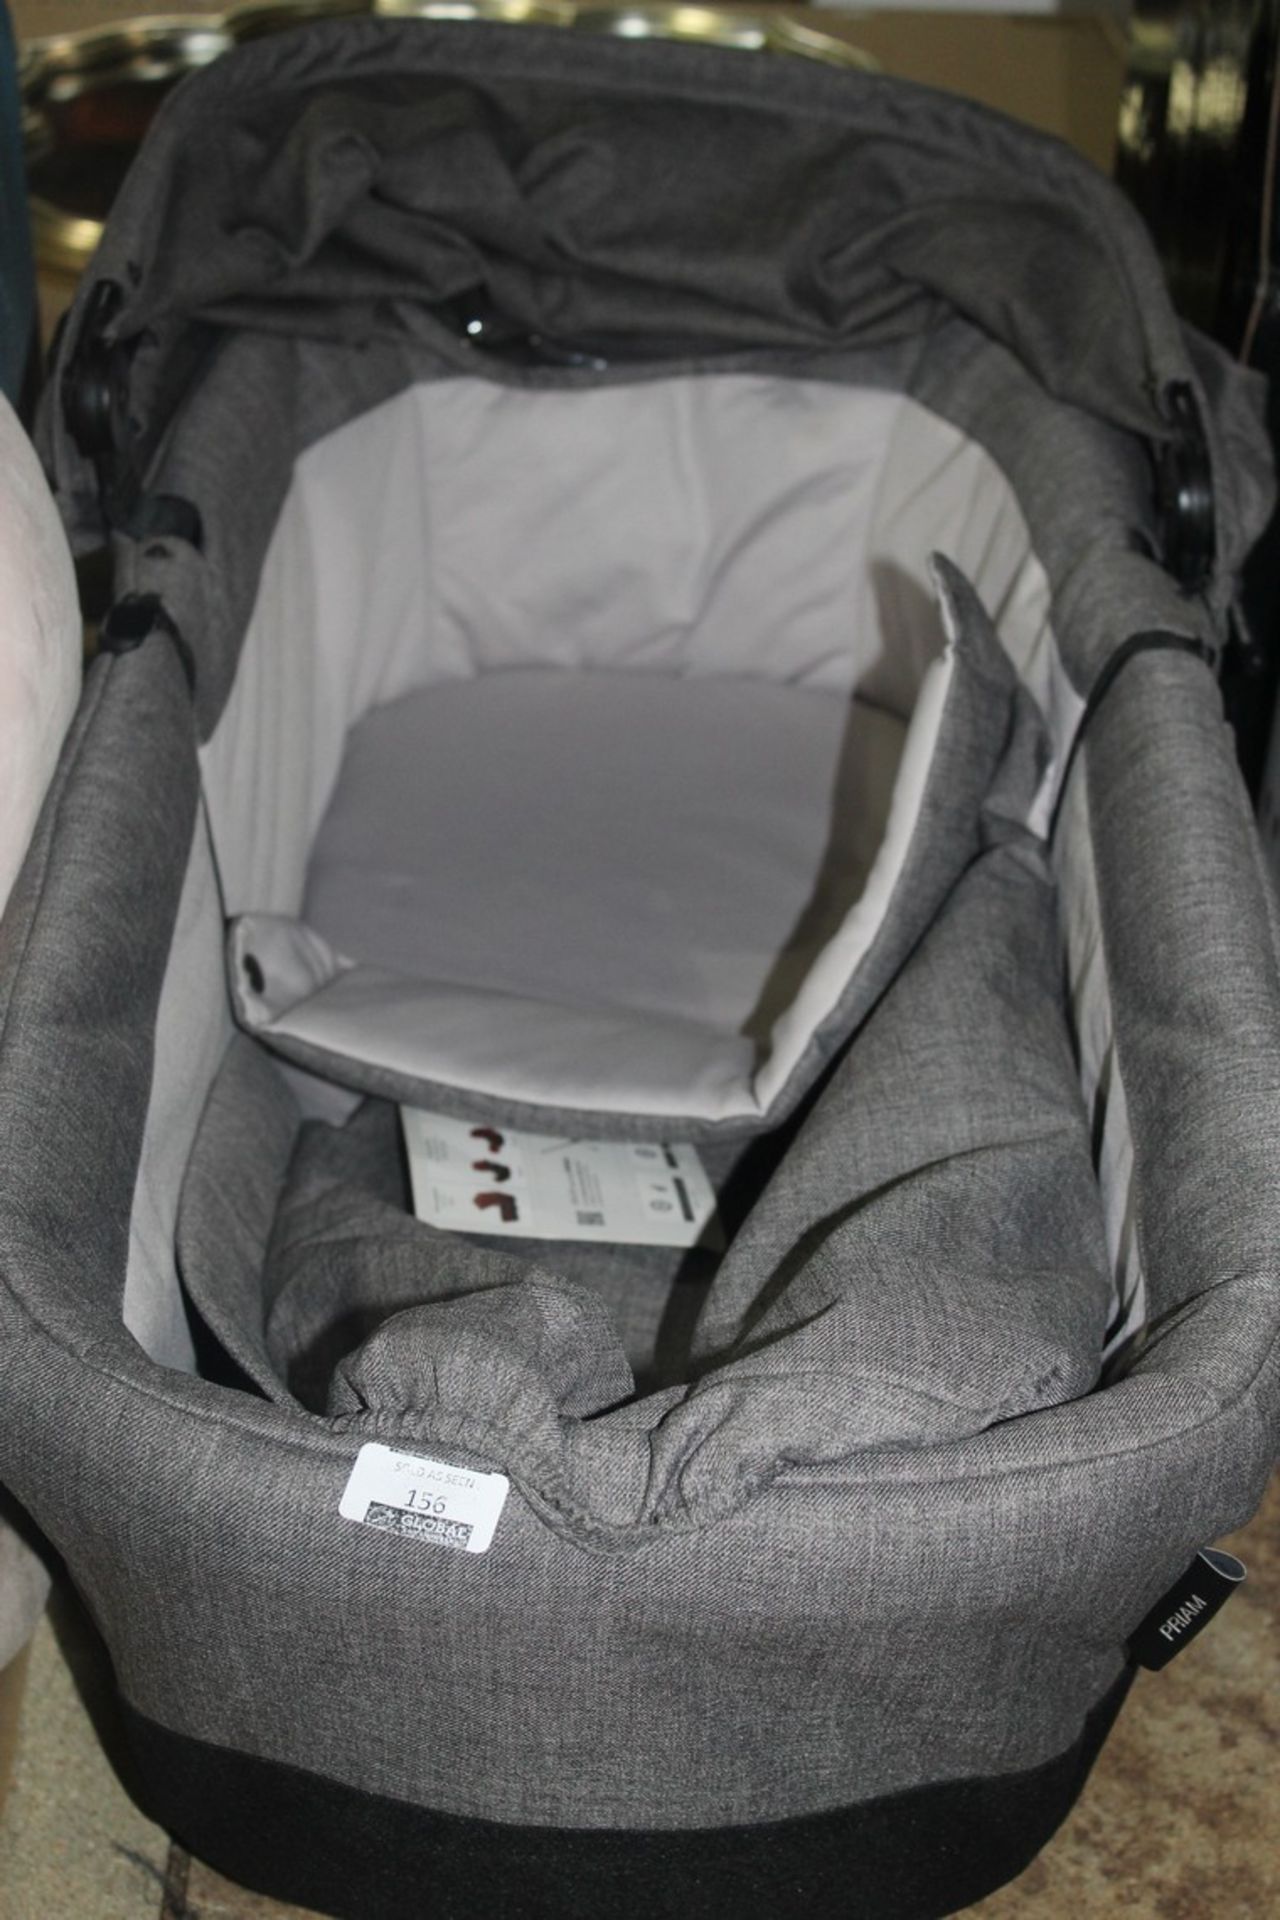 Cybex Priam Carry Cot Bassinette RRP £400 (4104601) (Public Viewing and Appraisals Available)